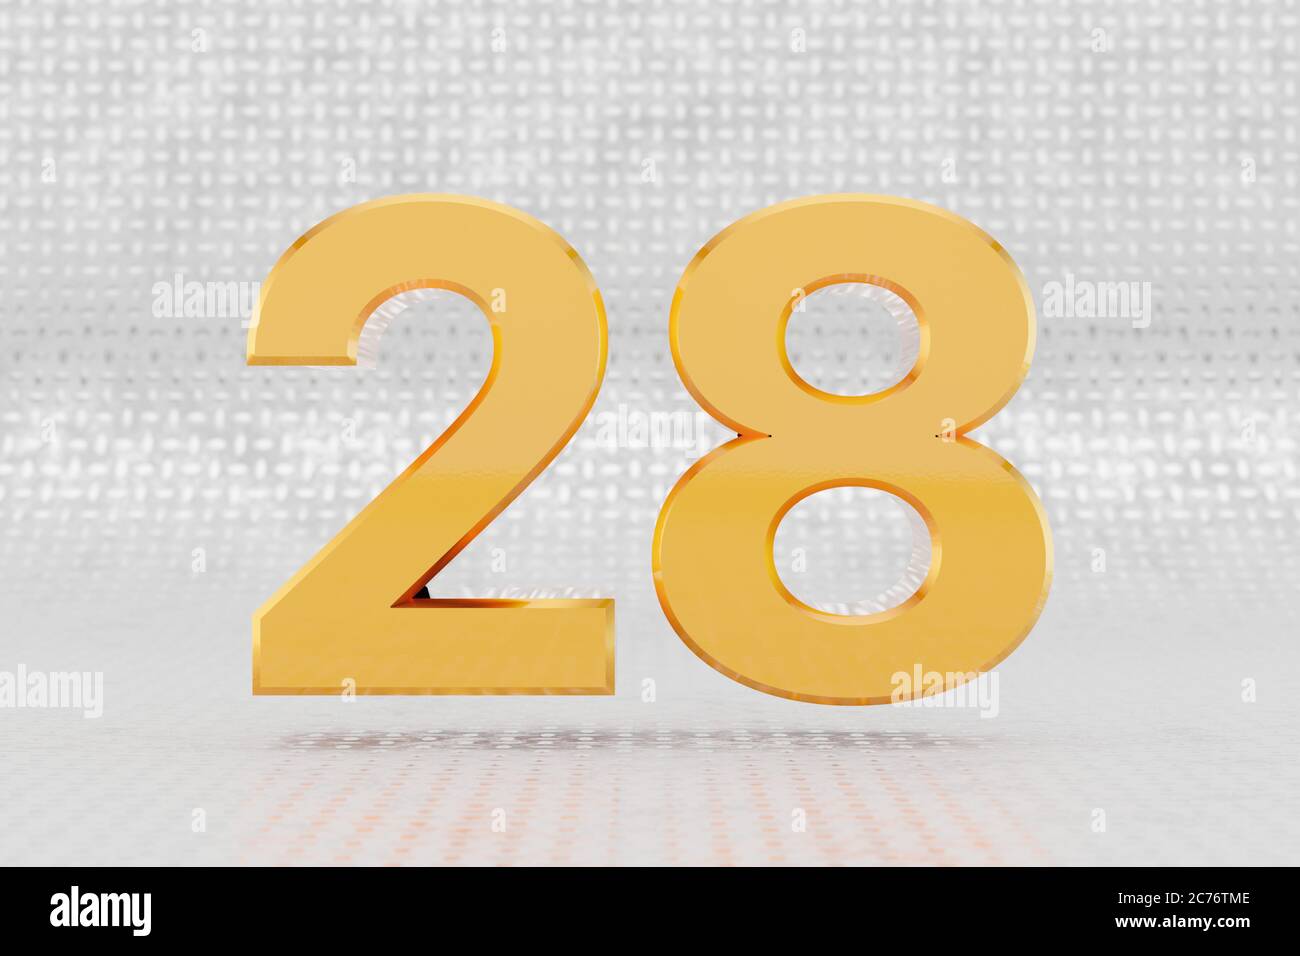 Yellow 3d number 28. Glossy yellow metallic number on metal floor background. Shiny gold metal alphabet with studio light reflections. 3d rendered font character. Stock Photo